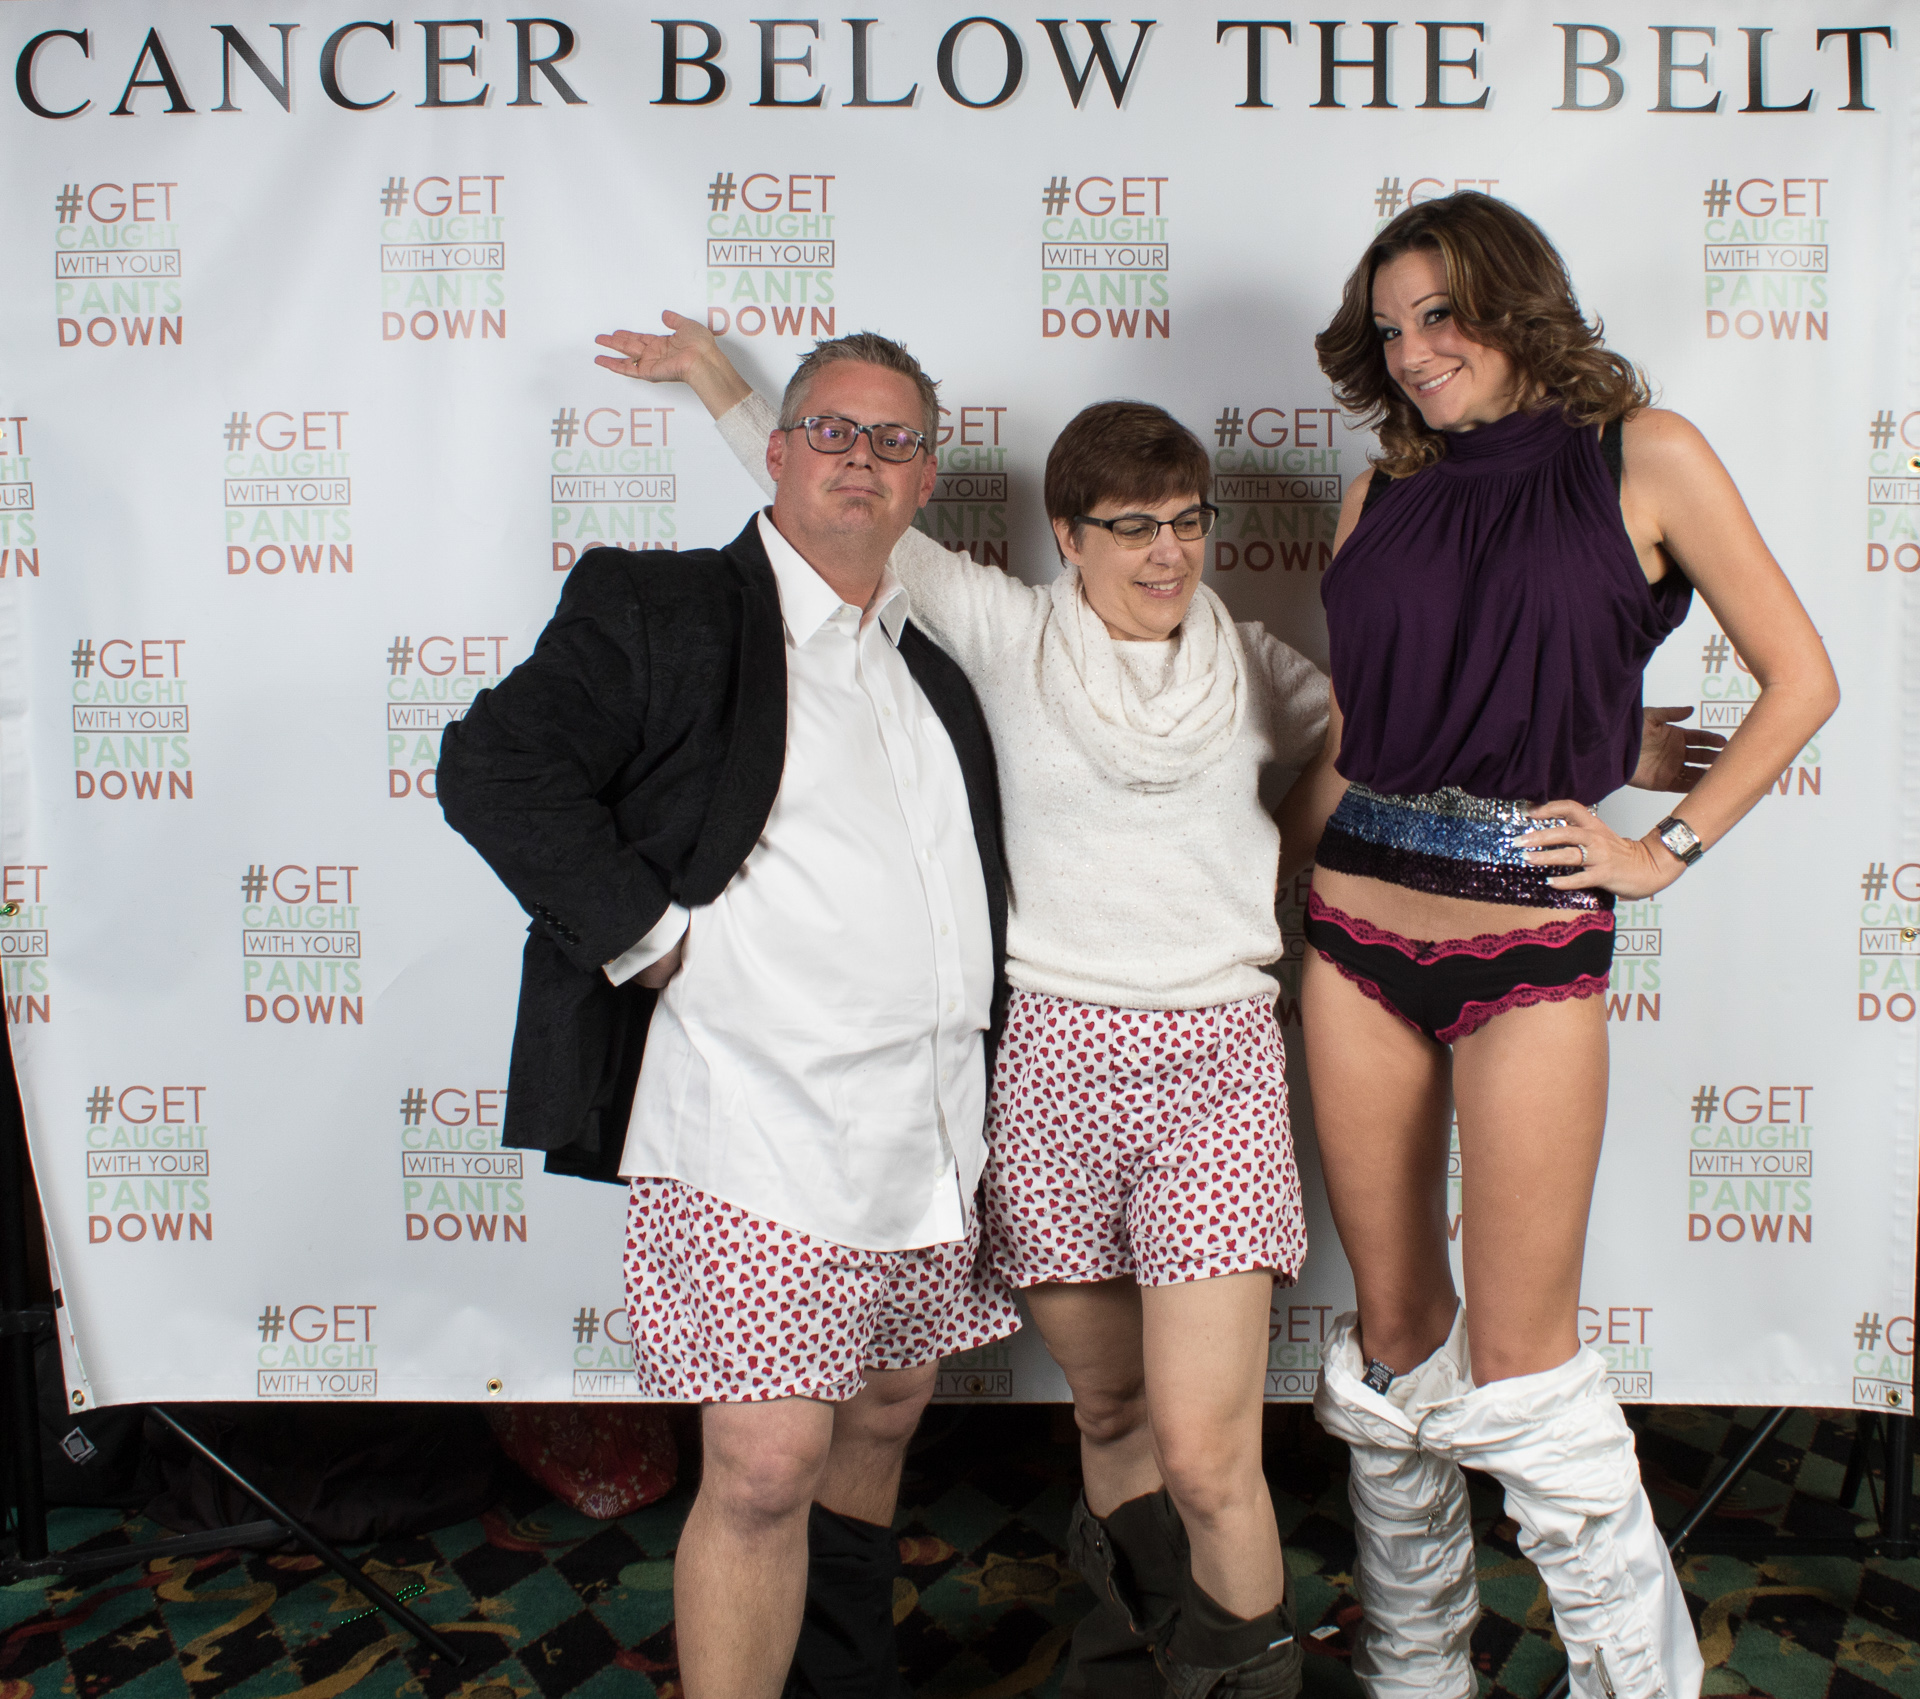 Below the Belt” cancers need our attention!